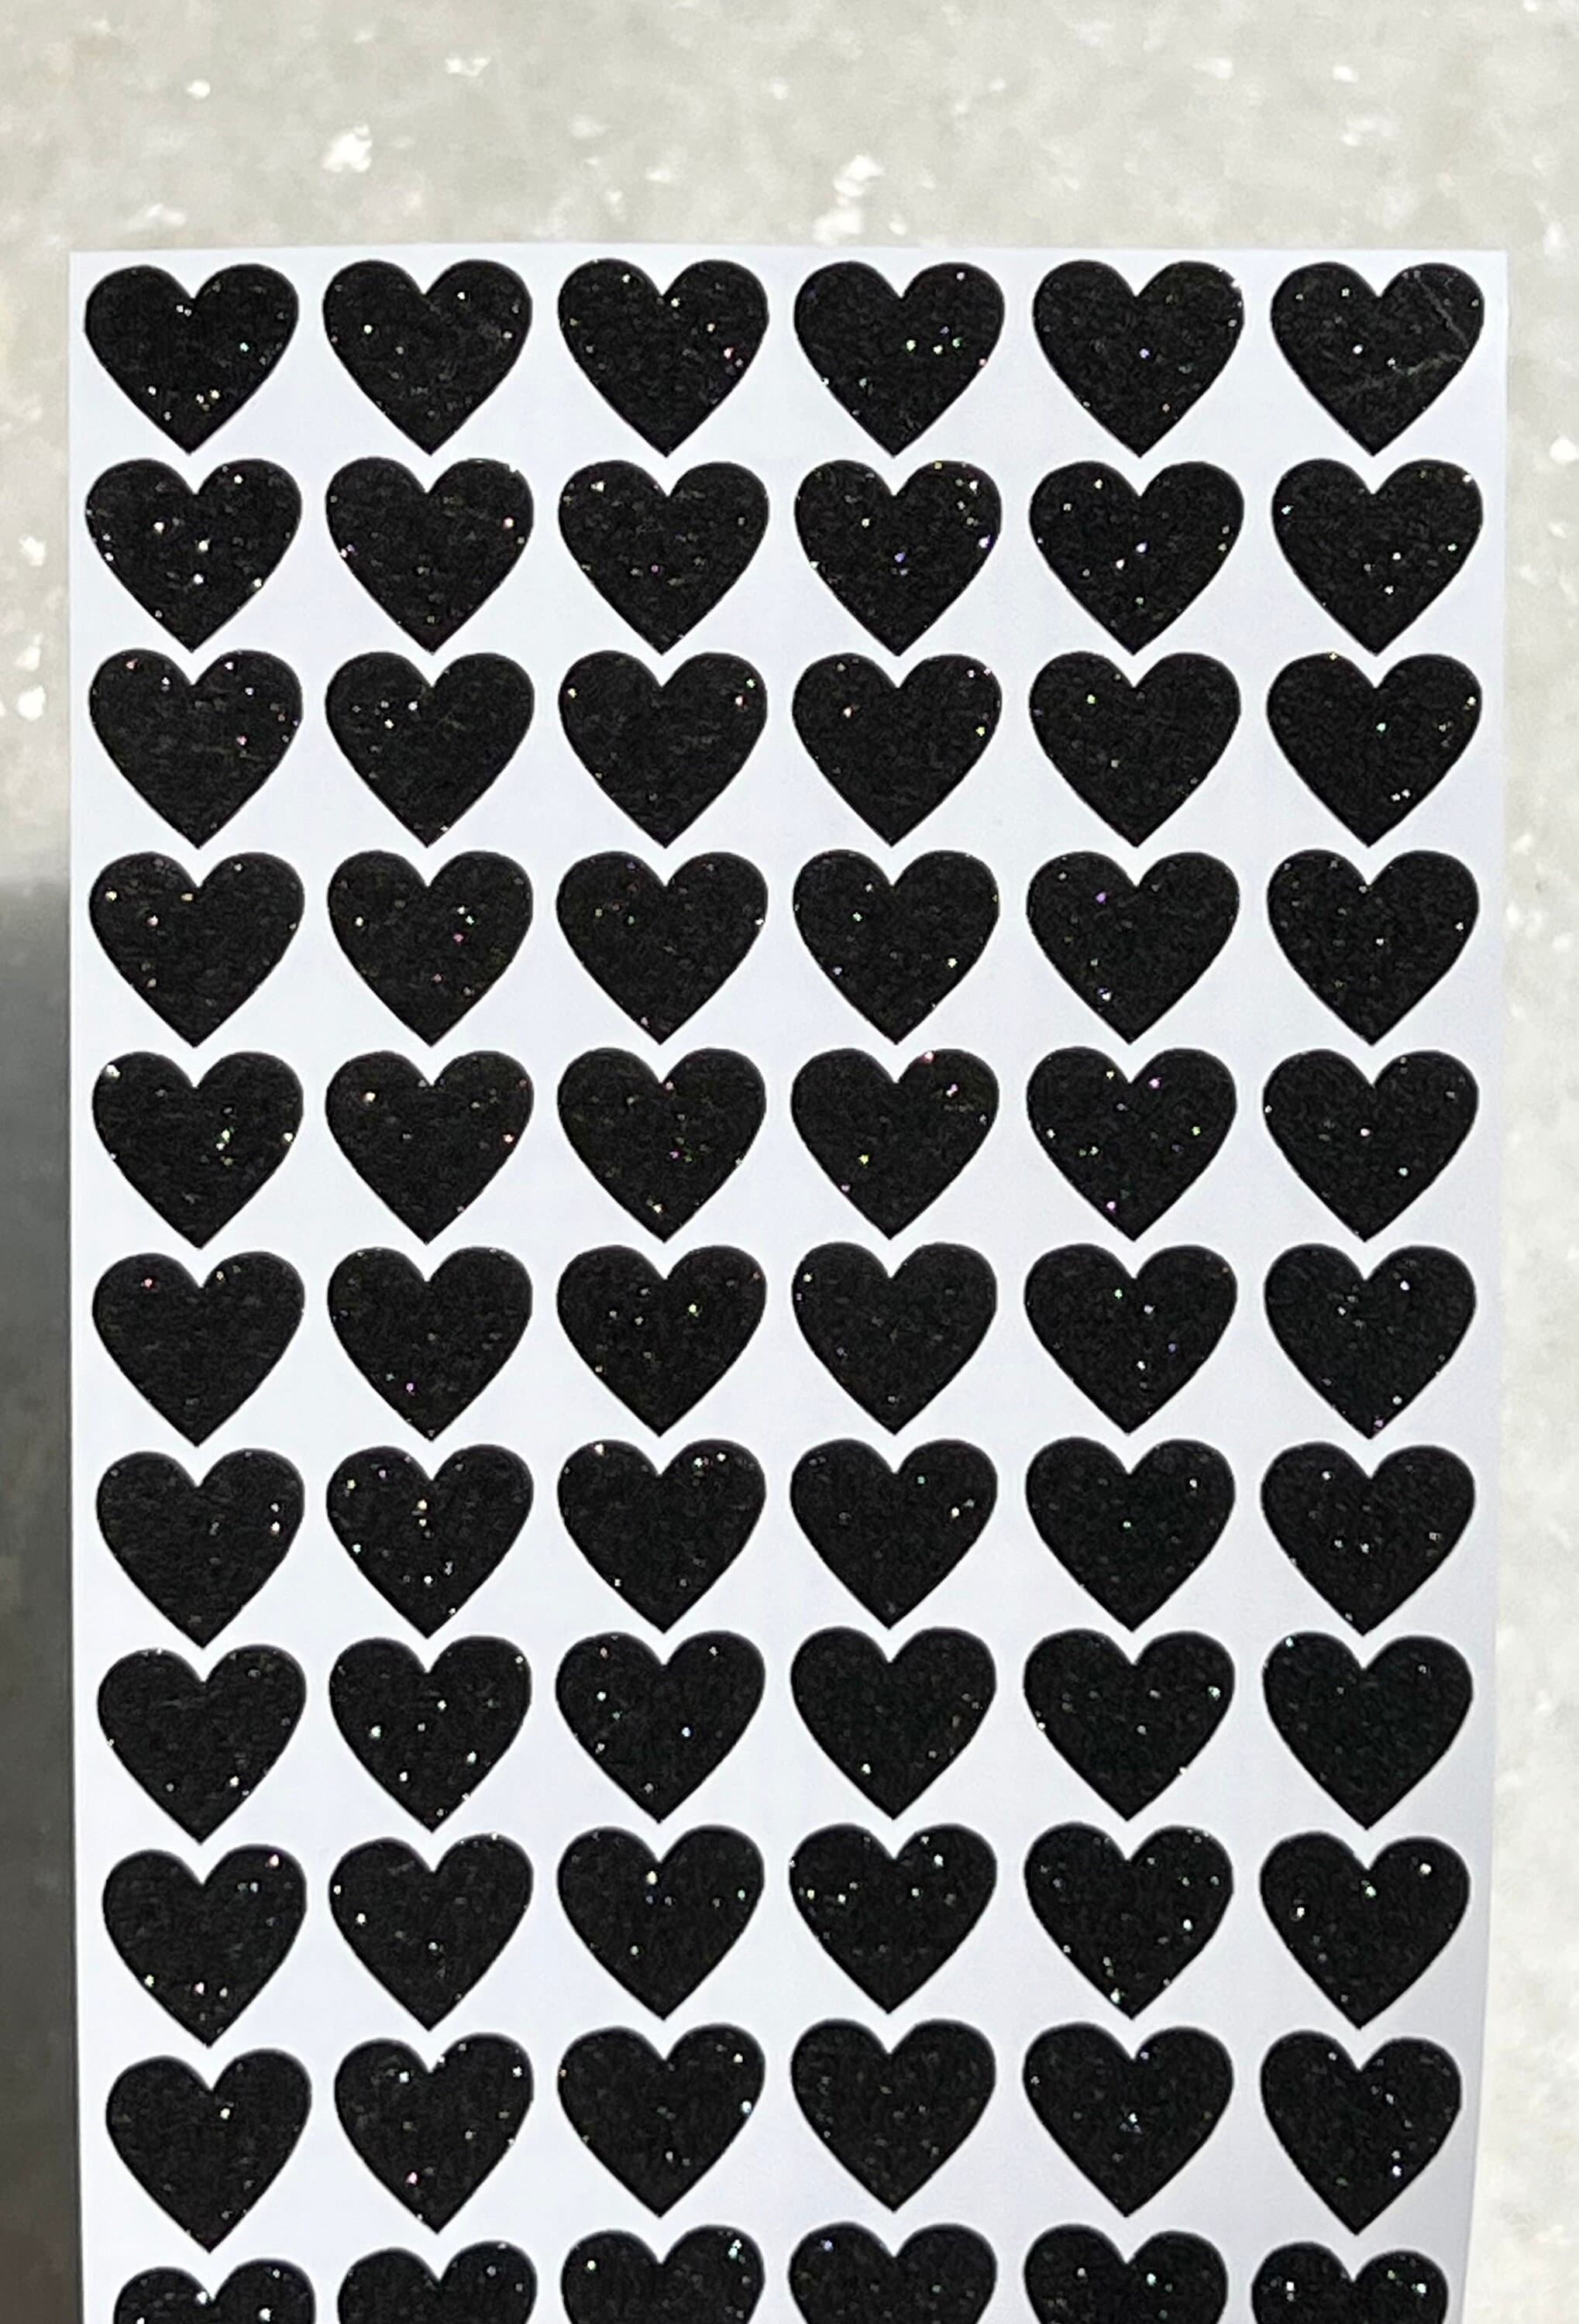 48 White Heart Stickers, for Packaging, White Heart Mini Decals, White Heart  Envelope Seals, Gift Wrapping or Wedding Invitations 